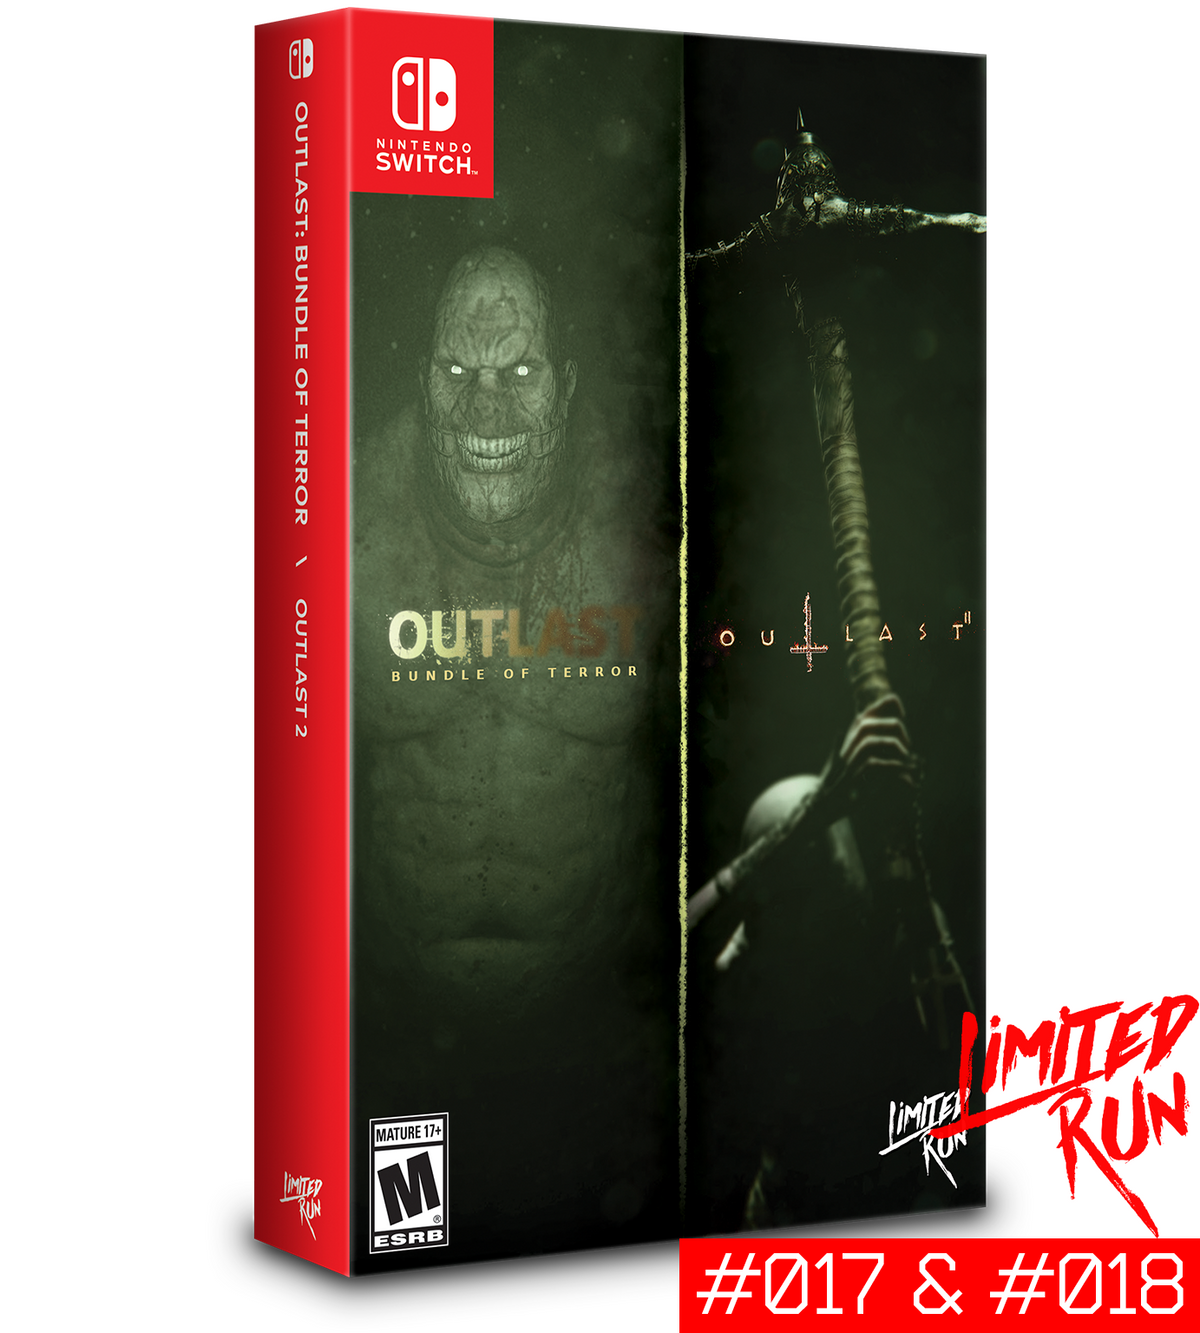 Switch Run #18: Outlast Outlast 2 [PREORDER] – Limited Run Games